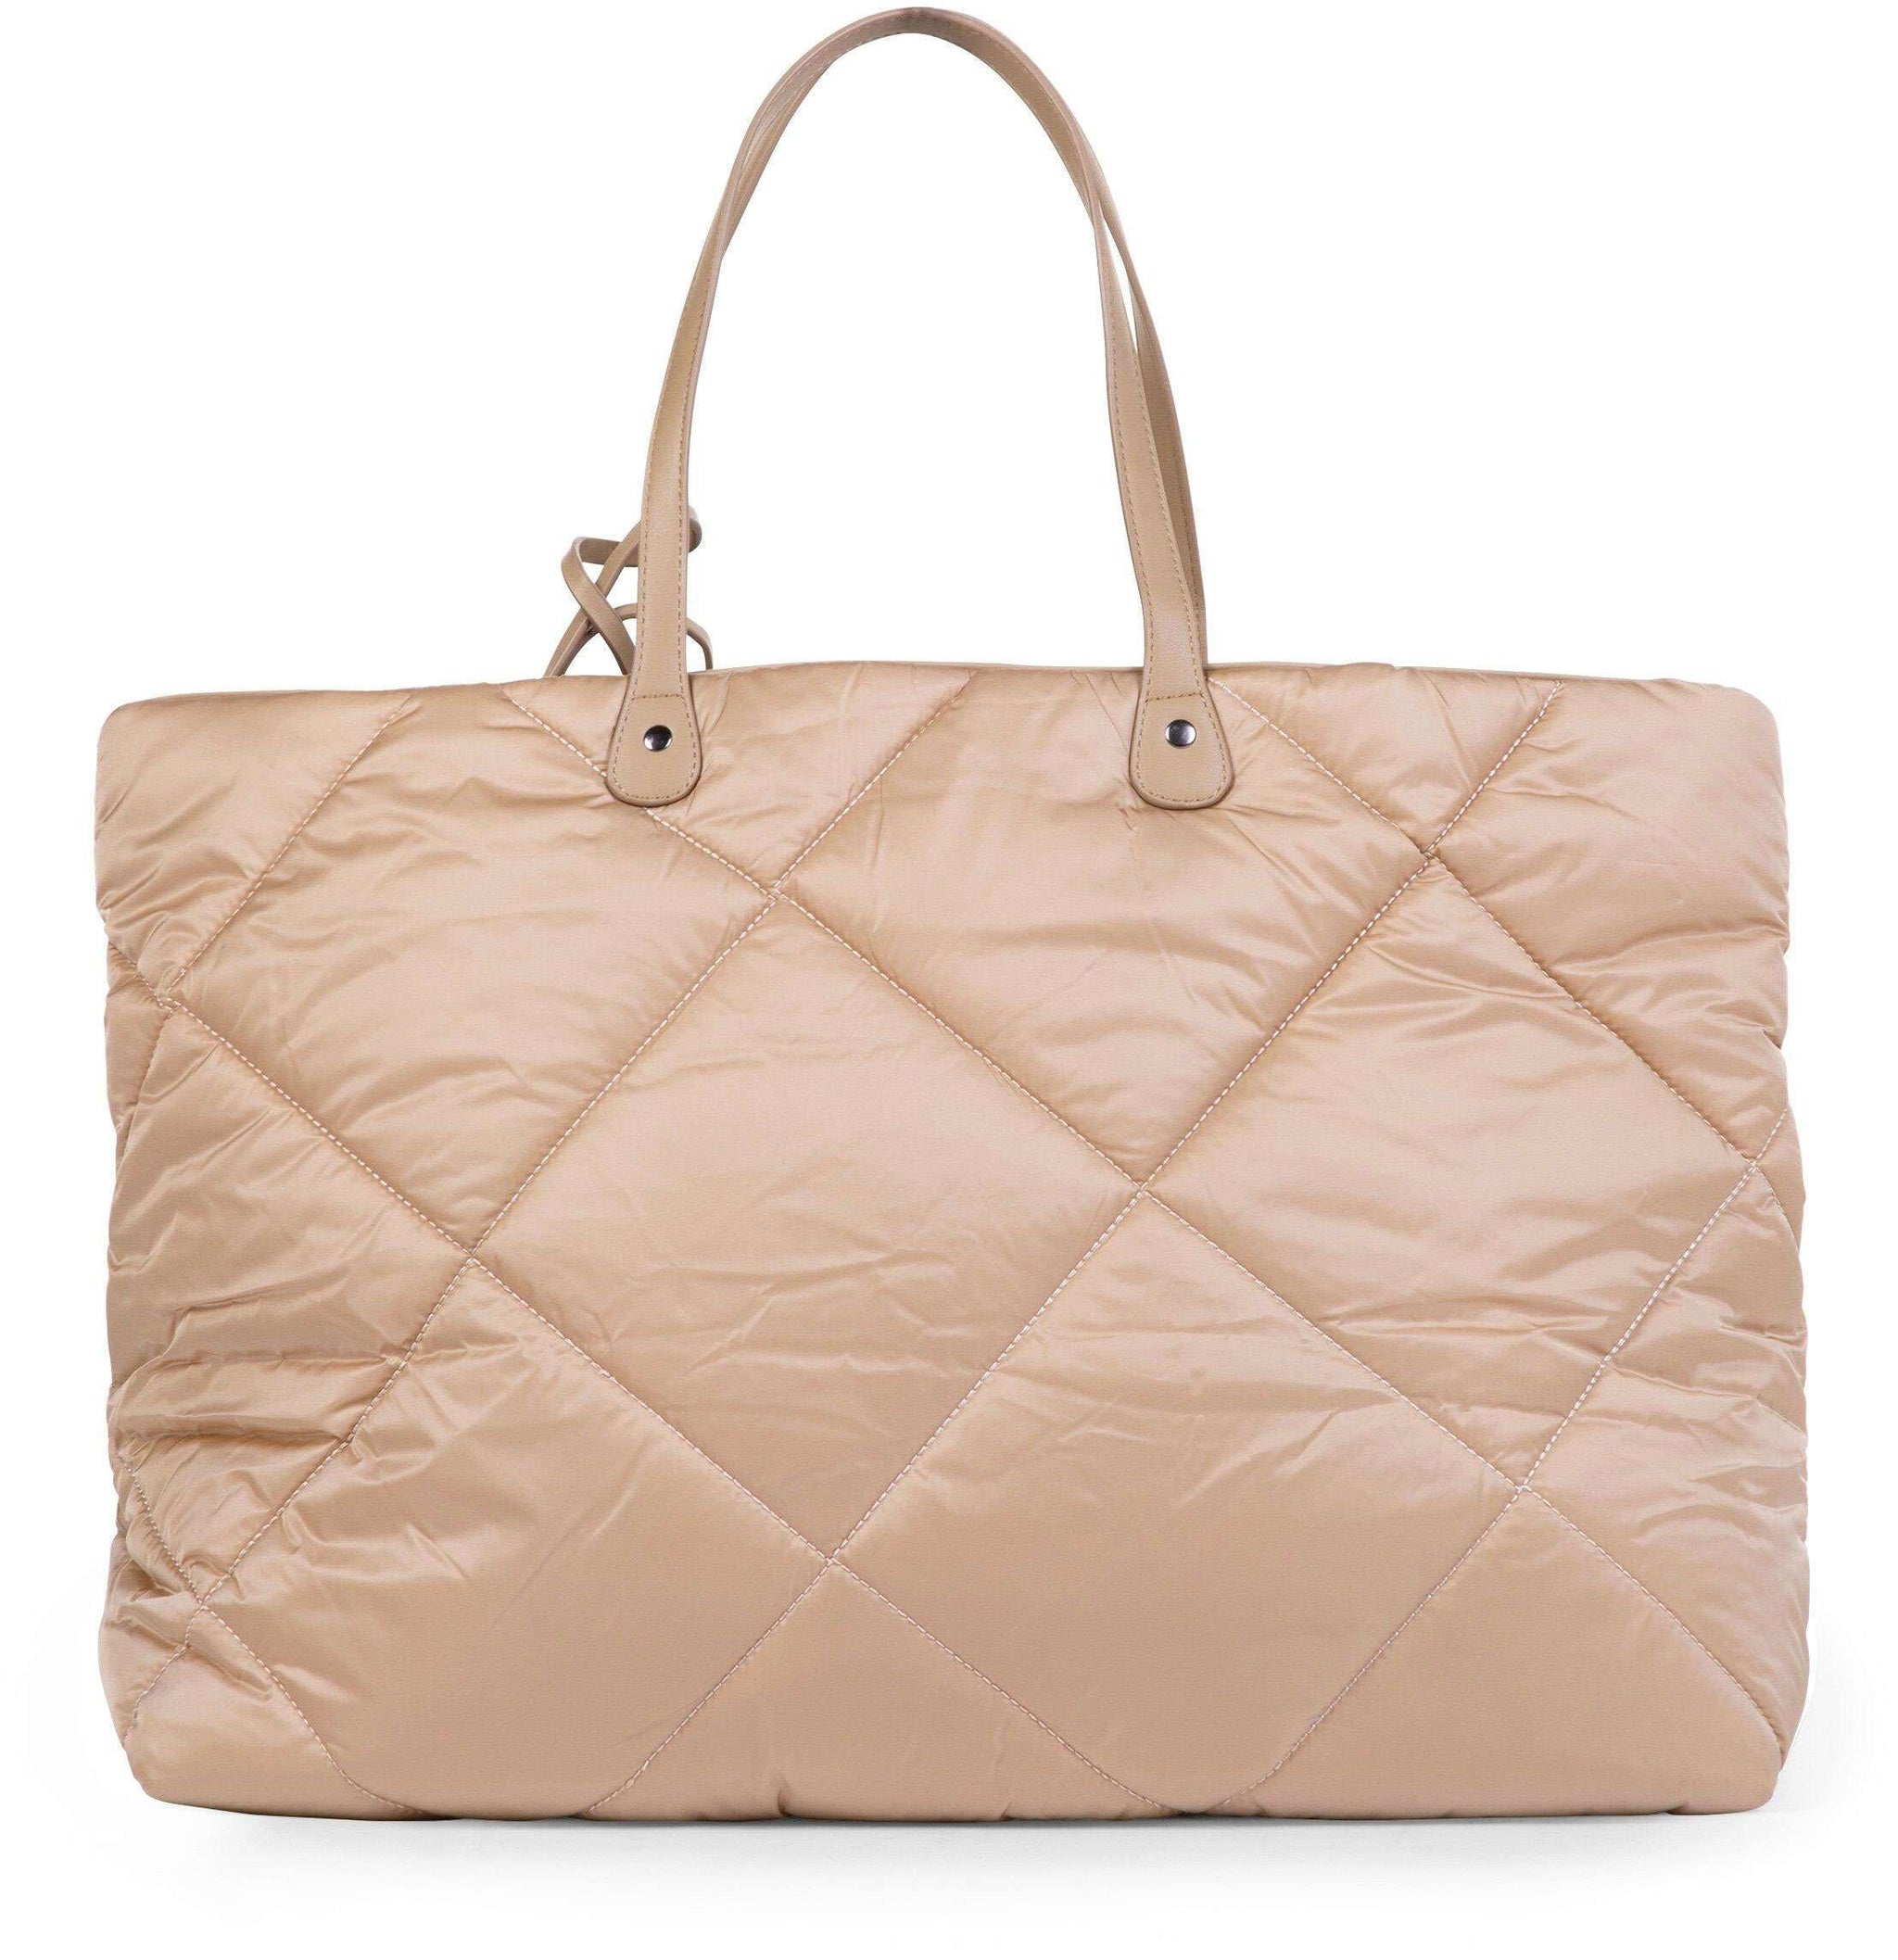 Family Bag Quilted Puffered Beige - ChildHome